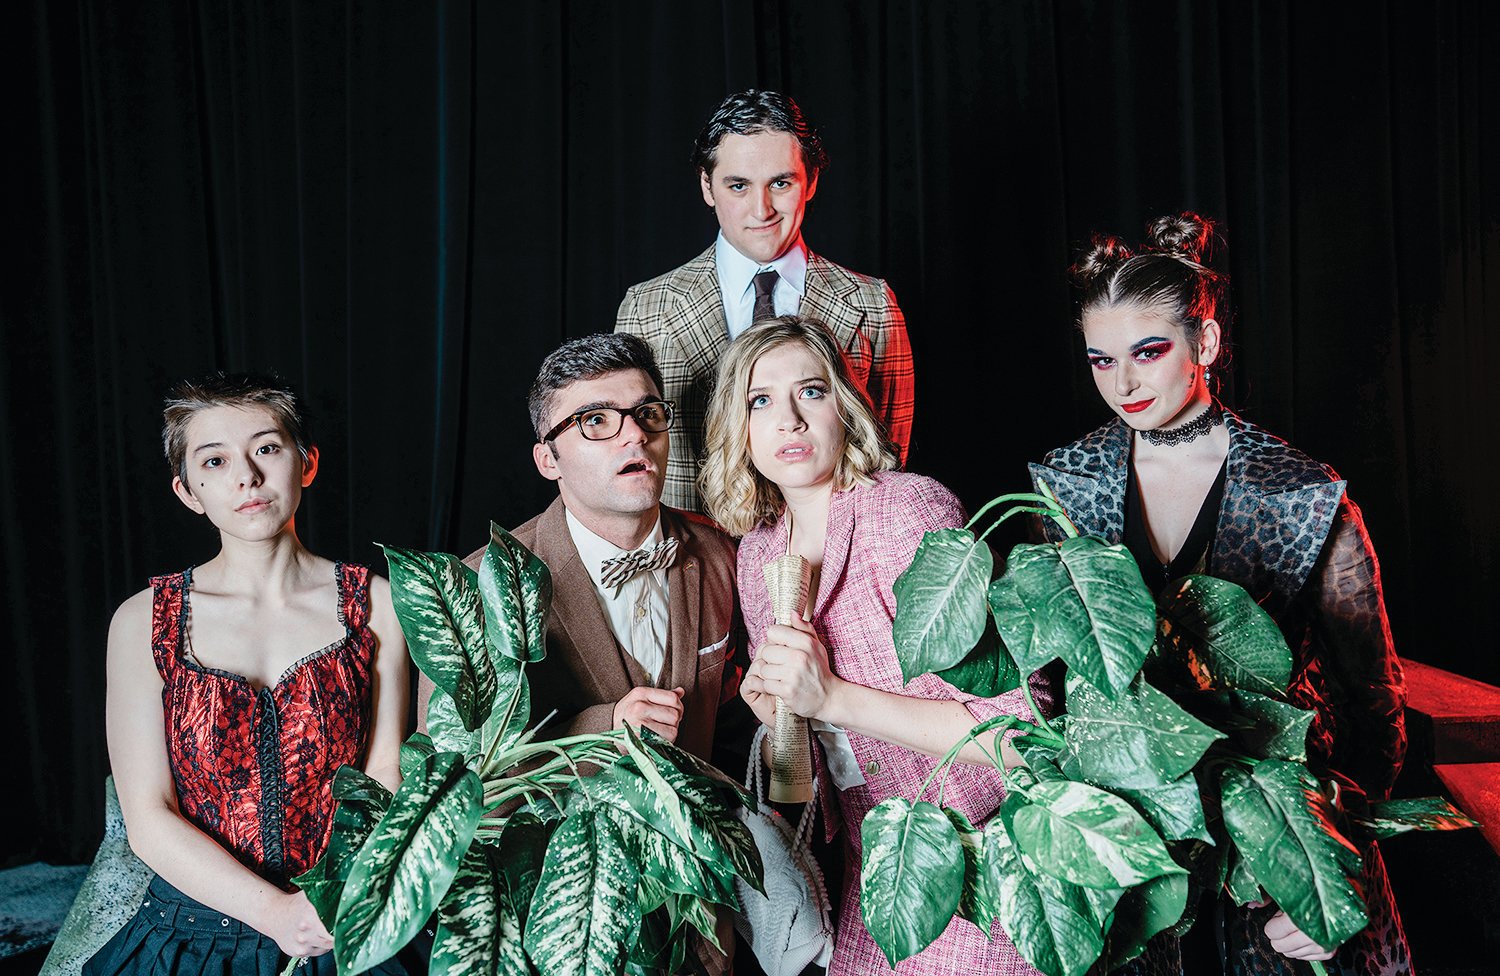 Aidan Costa and Olivia Humulock play the wholesome couple Brad Majors and Janet Weiss in “The Rocky Horror Show.” They are circled by phantoms Zoe Pepin, left, and Jenna Muldoon, right, with the play’s narrator, Justin Peters, in back.